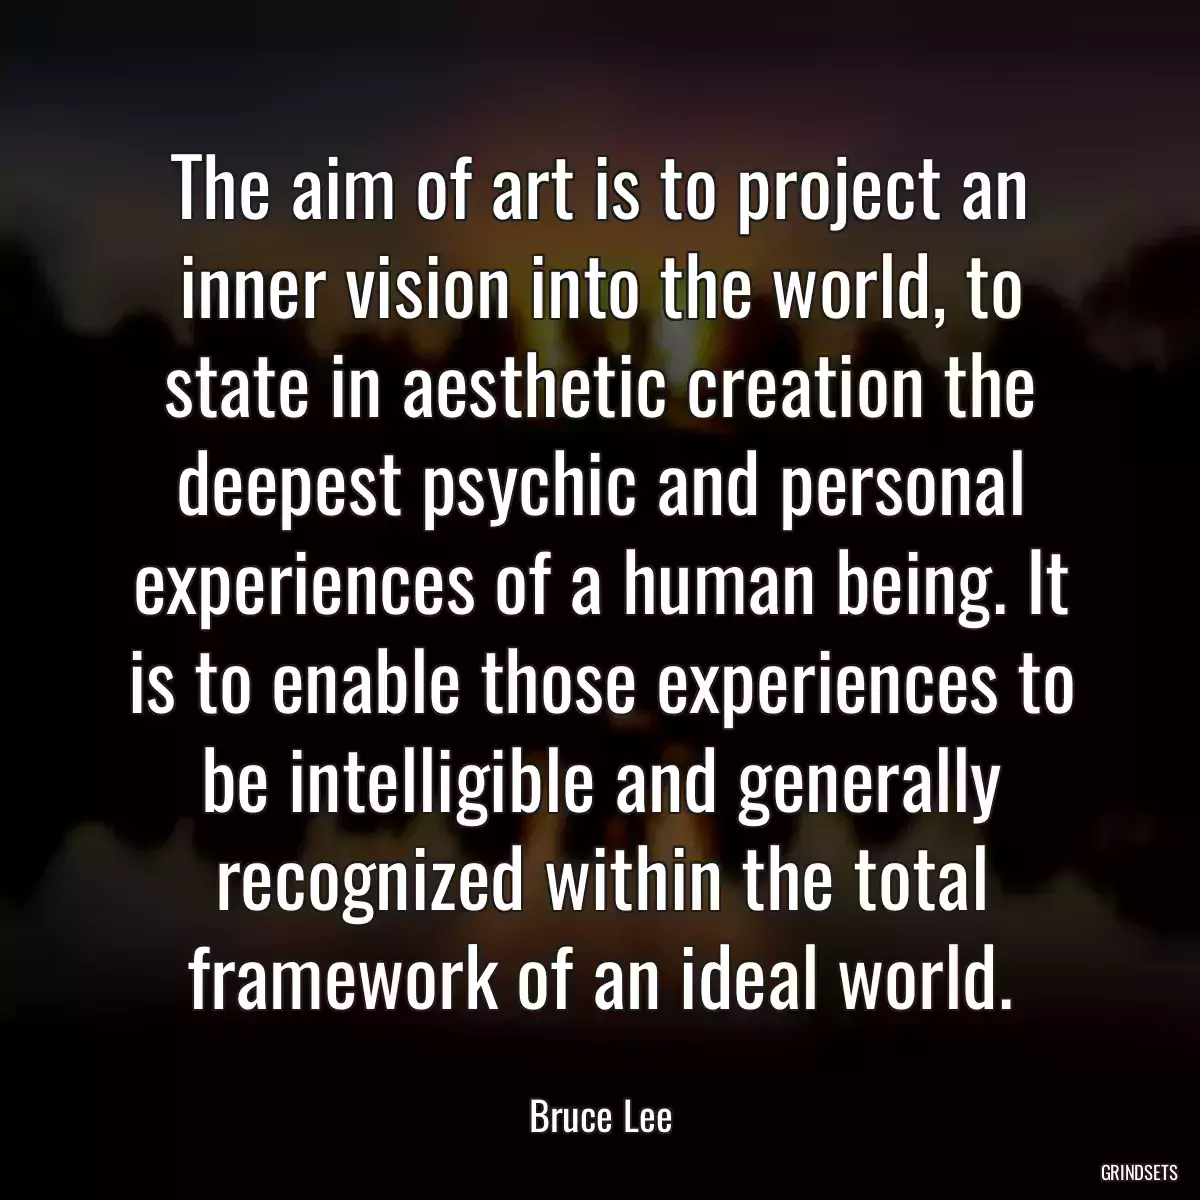 The aim of art is to project an inner vision into the world, to state in aesthetic creation the deepest psychic and personal experiences of a human being. It is to enable those experiences to be intelligible and generally recognized within the total framework of an ideal world.